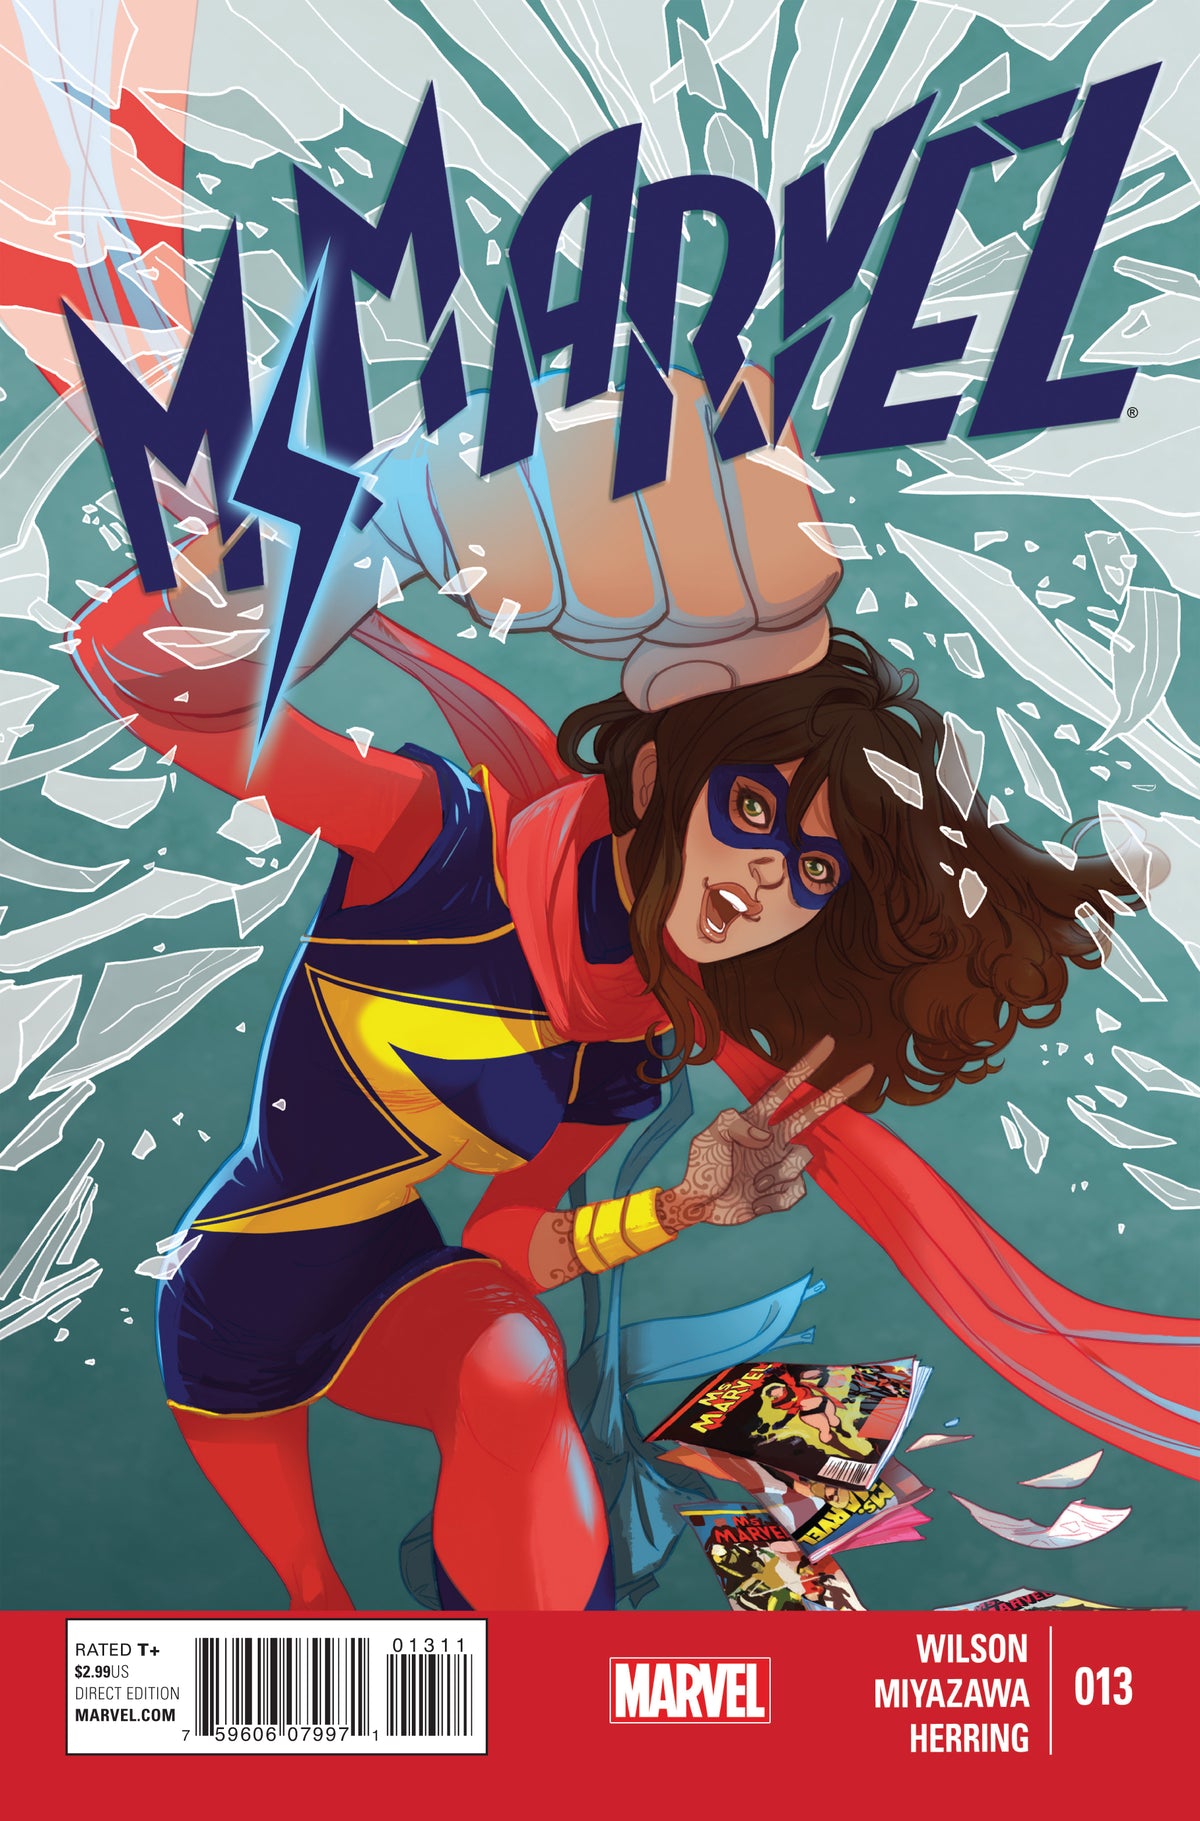 Photo of Ms Marvel Issue 13 comic sold by Stronghold Collectibles